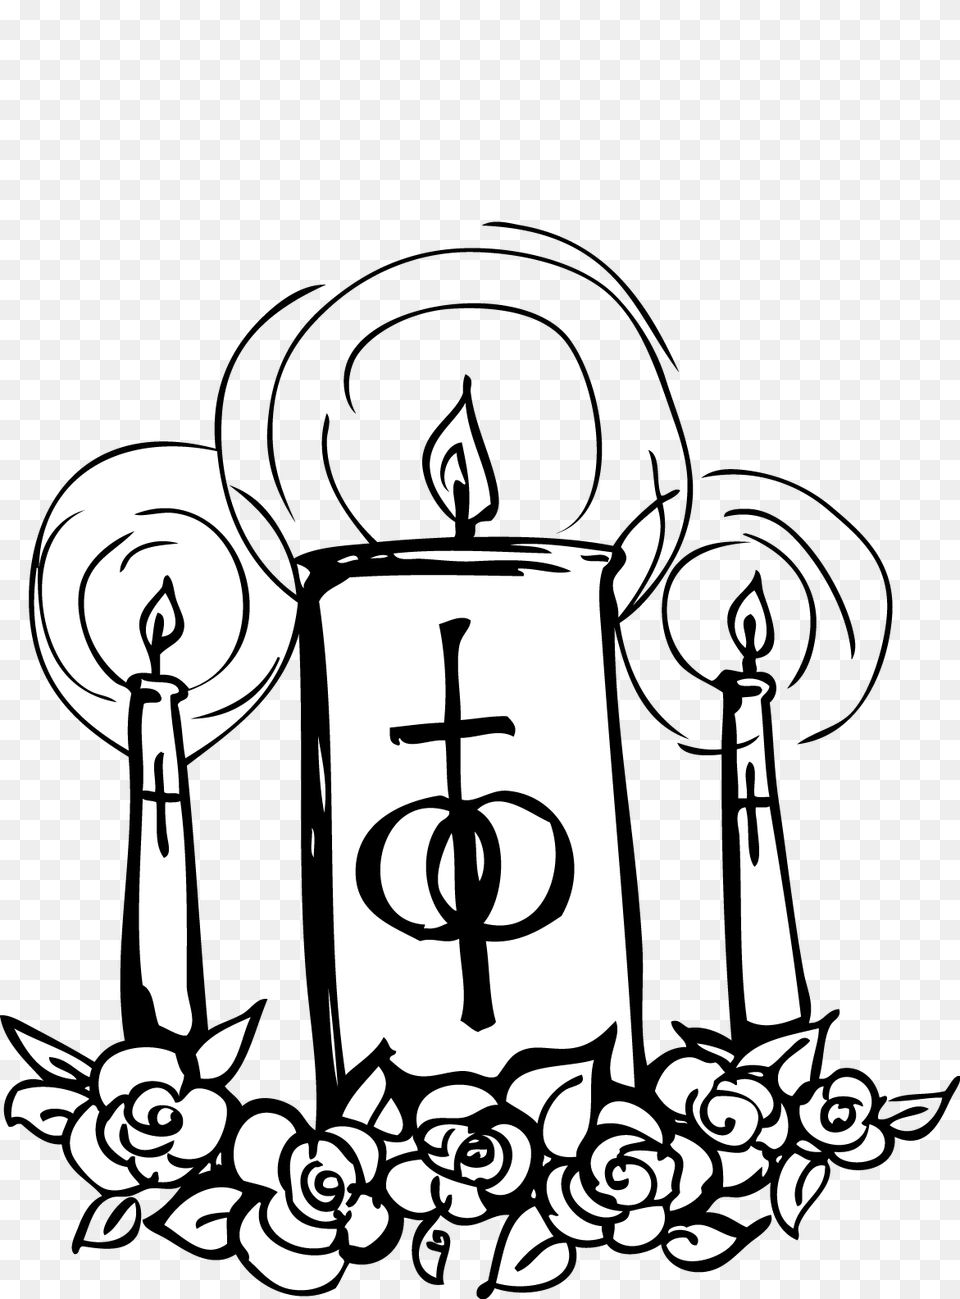 Unity Candle Clipart, Stencil, Art, Drawing Png